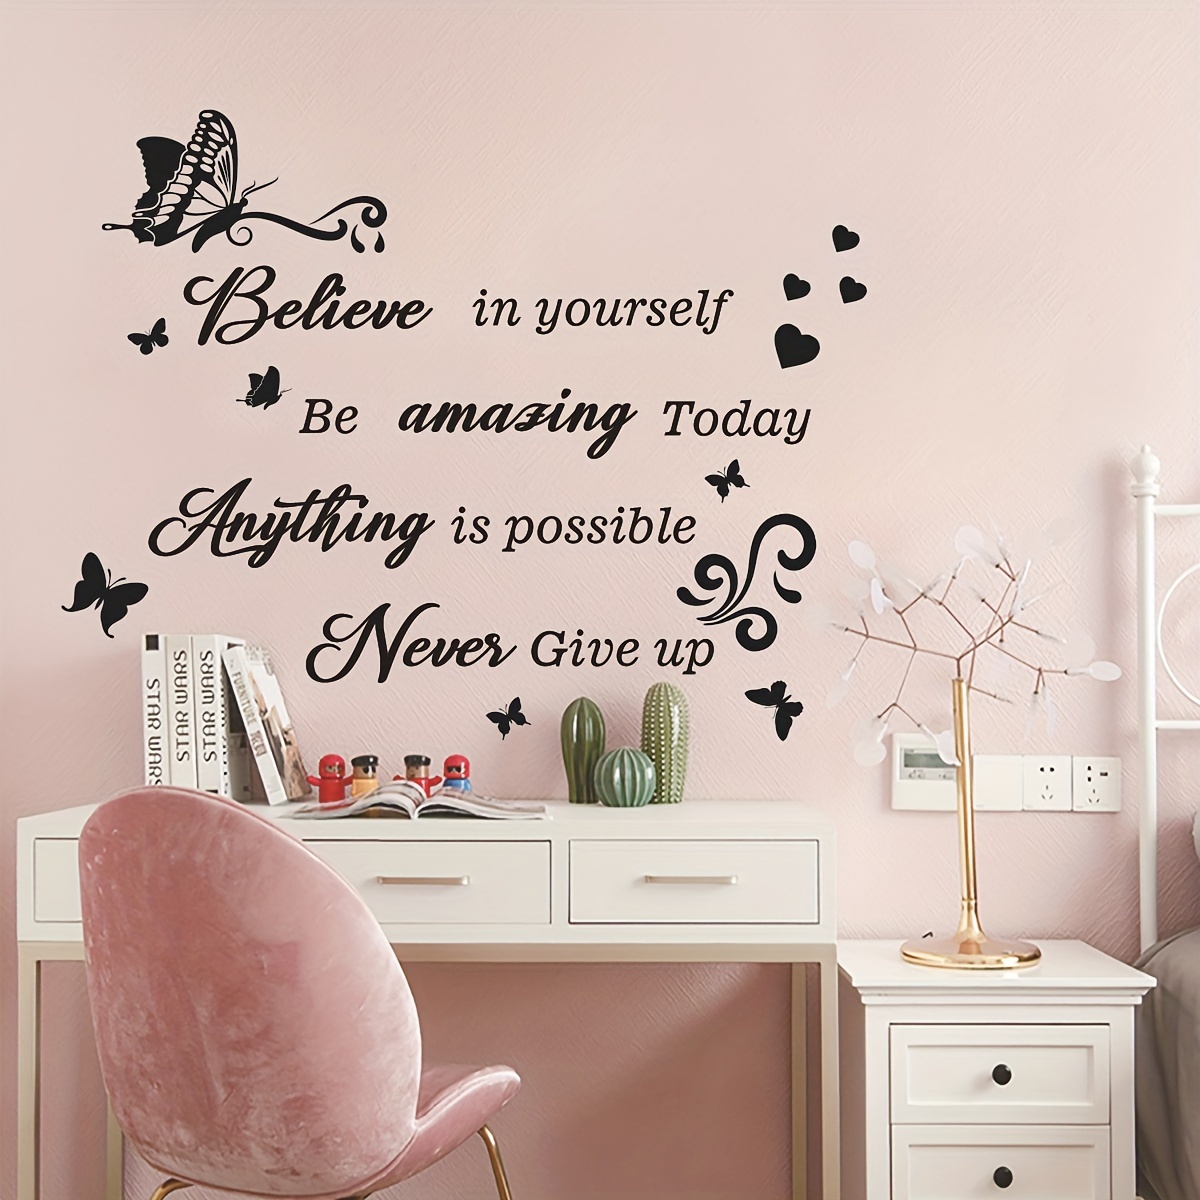 1pc inspirational quote wall decals black vinyl butterfly stickers believe in yourself never give up removable self adhesive decor for home office study room